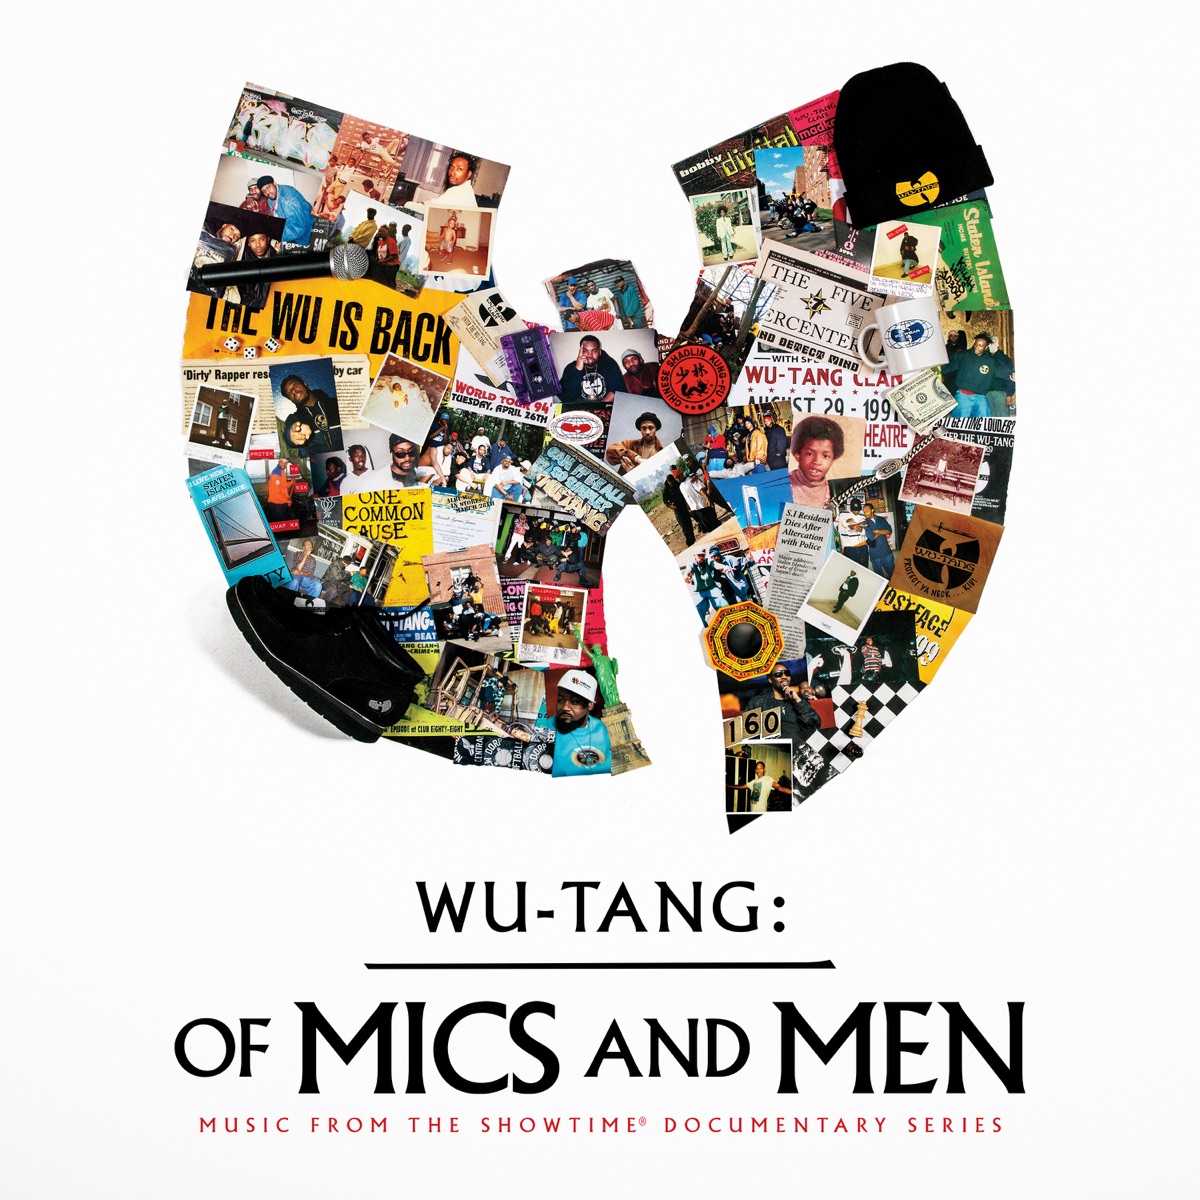 wu-tang clan - Wu-tang Clan Back in the Game Feat. Ron Isley -   Music